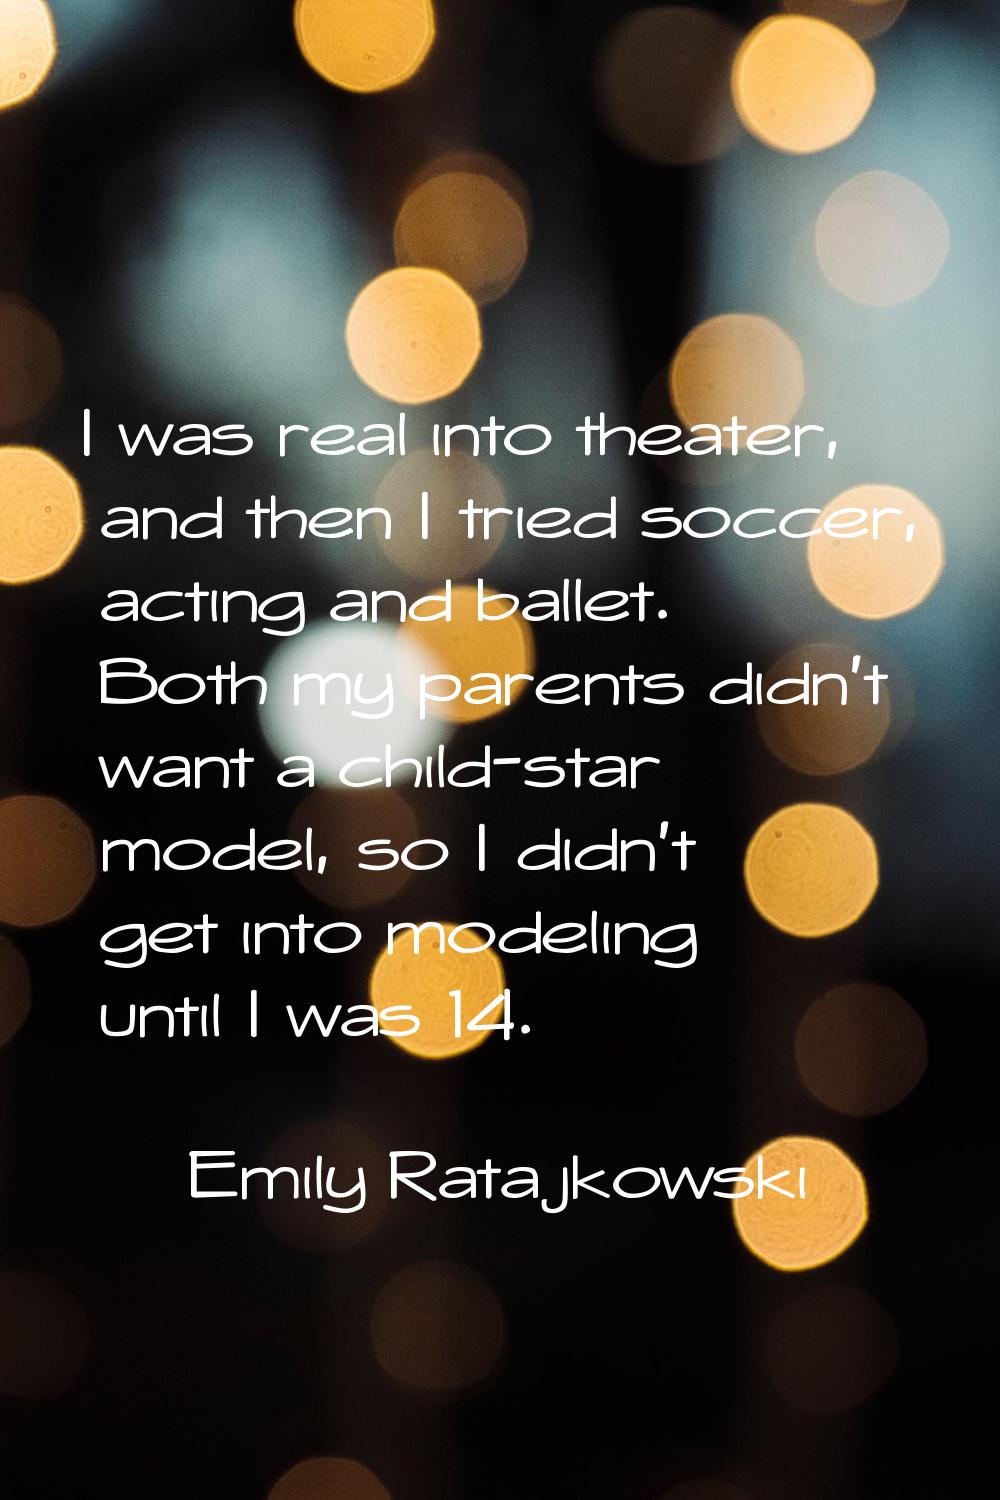 I was real into theater, and then I tried soccer, acting and ballet. Both my parents didn't want a 